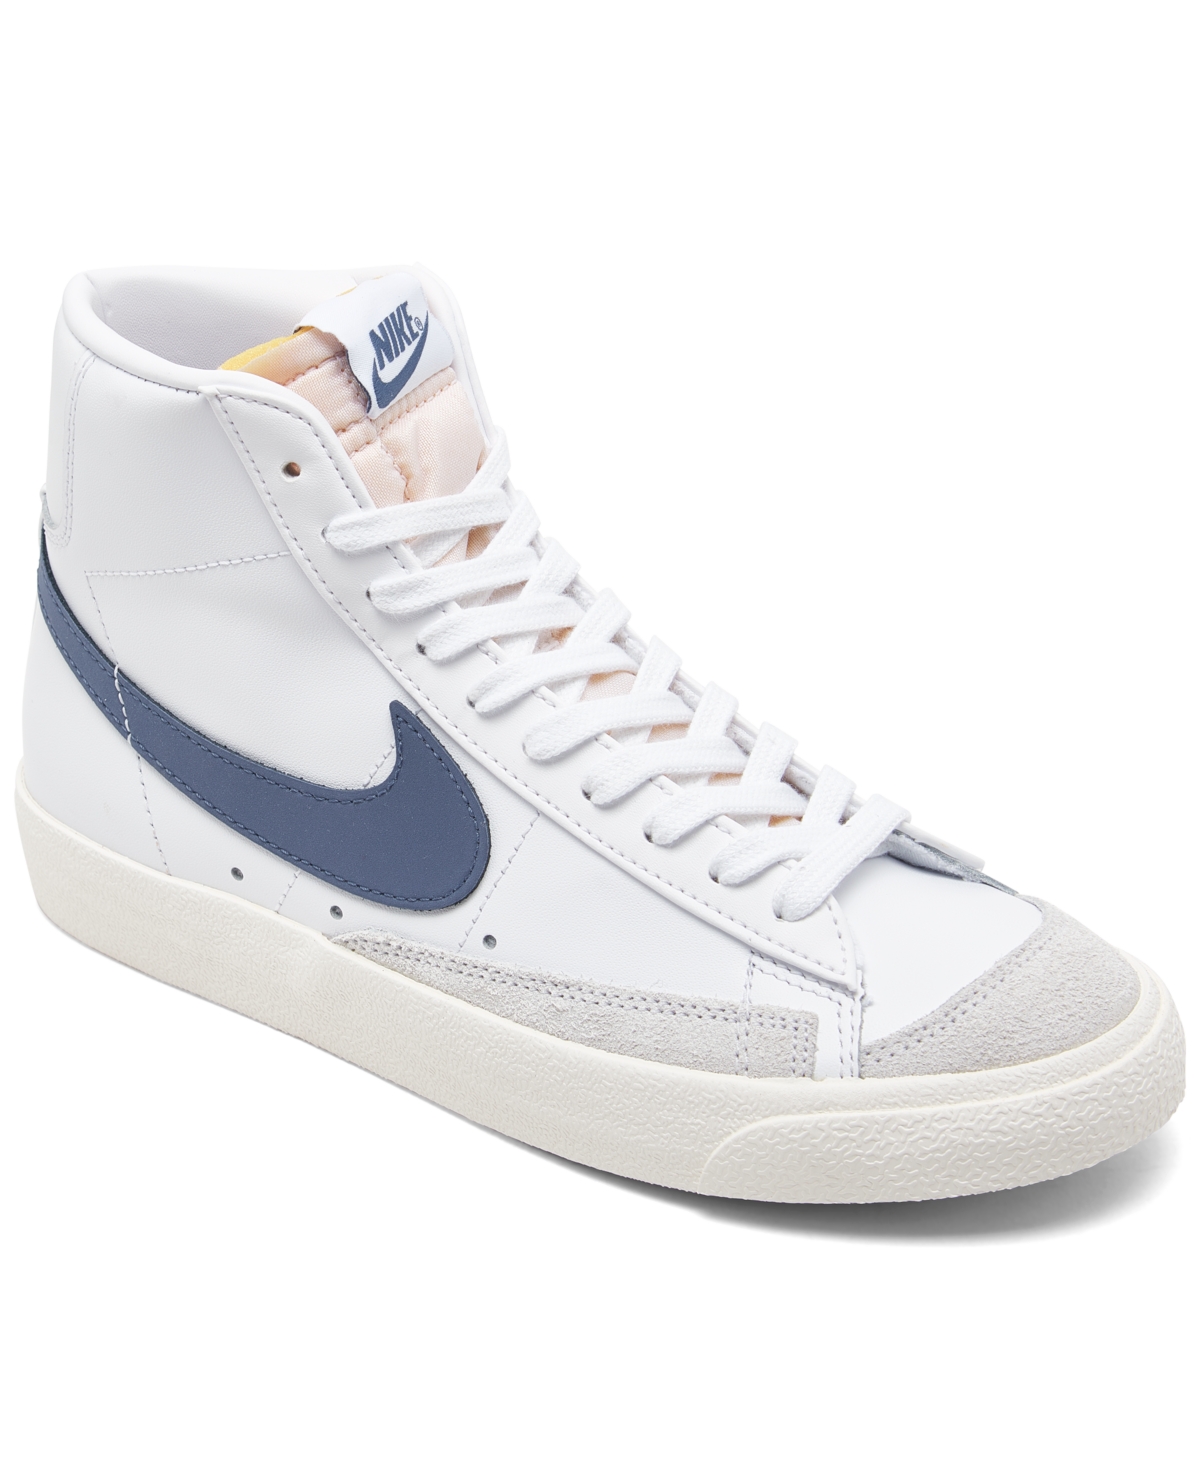 Women's Blazer Mid 77 Casual Sneakers from Finish Line - White, Diffused Blue, Sail